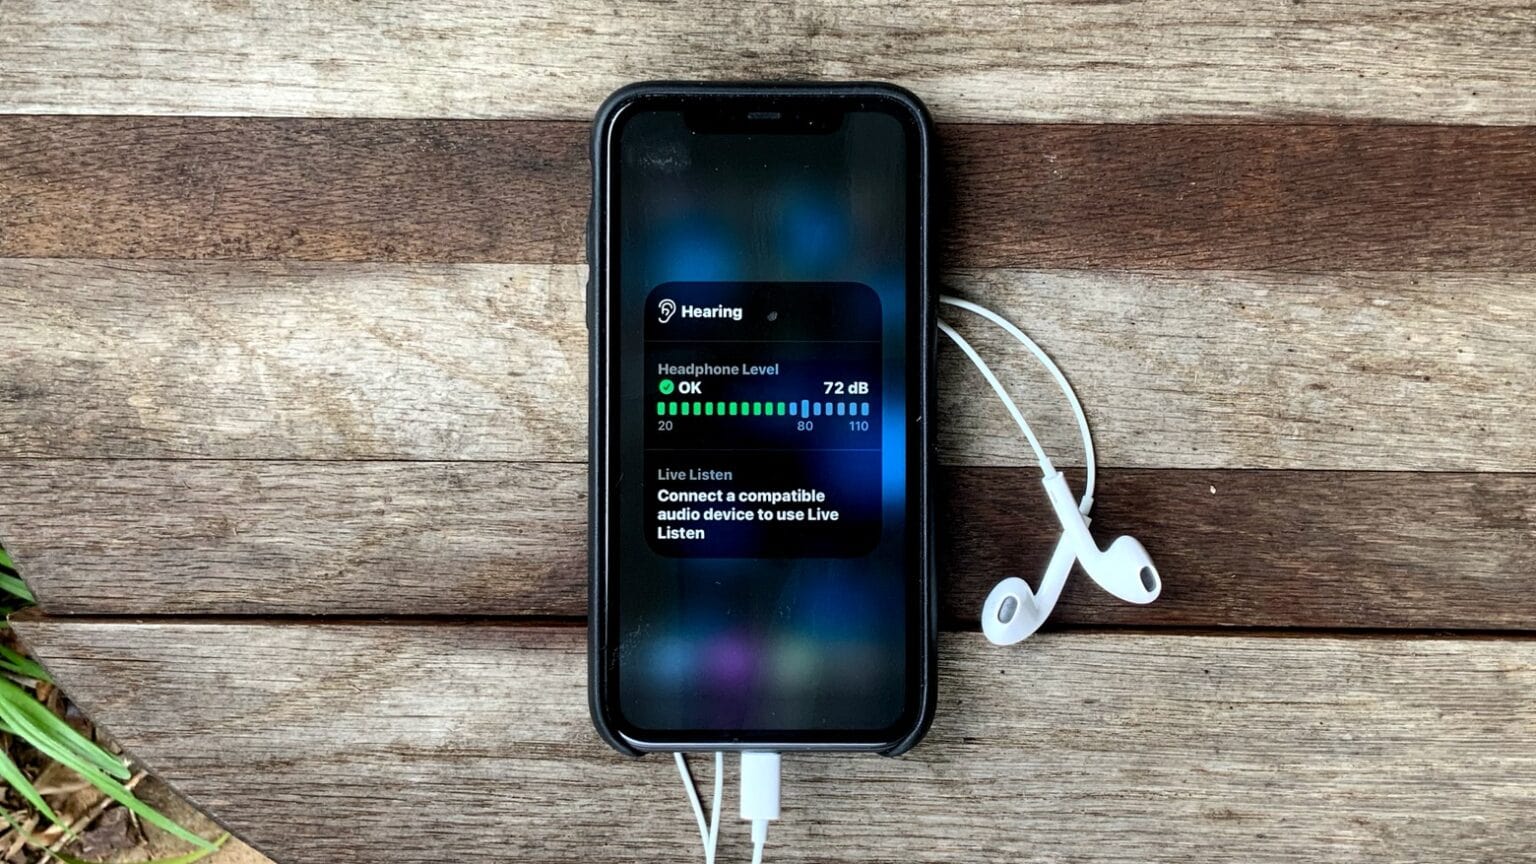 iOS 14 looks out for your hearing